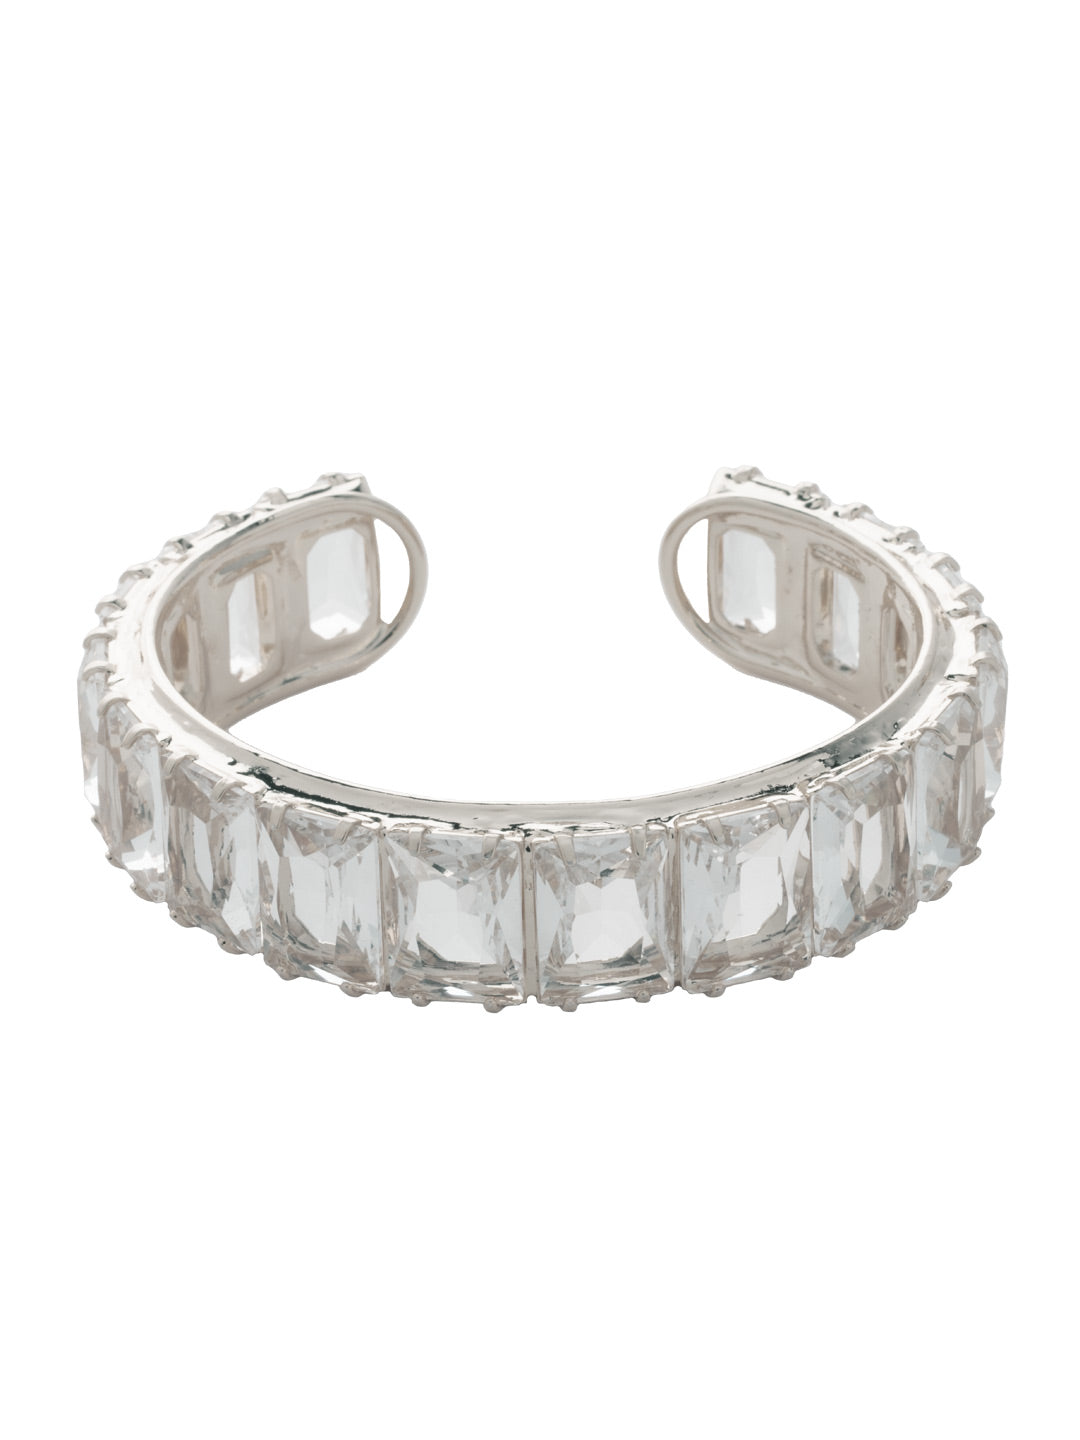 Julianna Emerald Cut Cuff Bracelet - BFD78PDCRY - <p>The Julianna Emerald Cut Cuff Bracelet features a row of rectangle cut candy drop crystals around an adjustable cuff bracelet band. From Sorrelli's Crystal collection in our Palladium finish.</p>